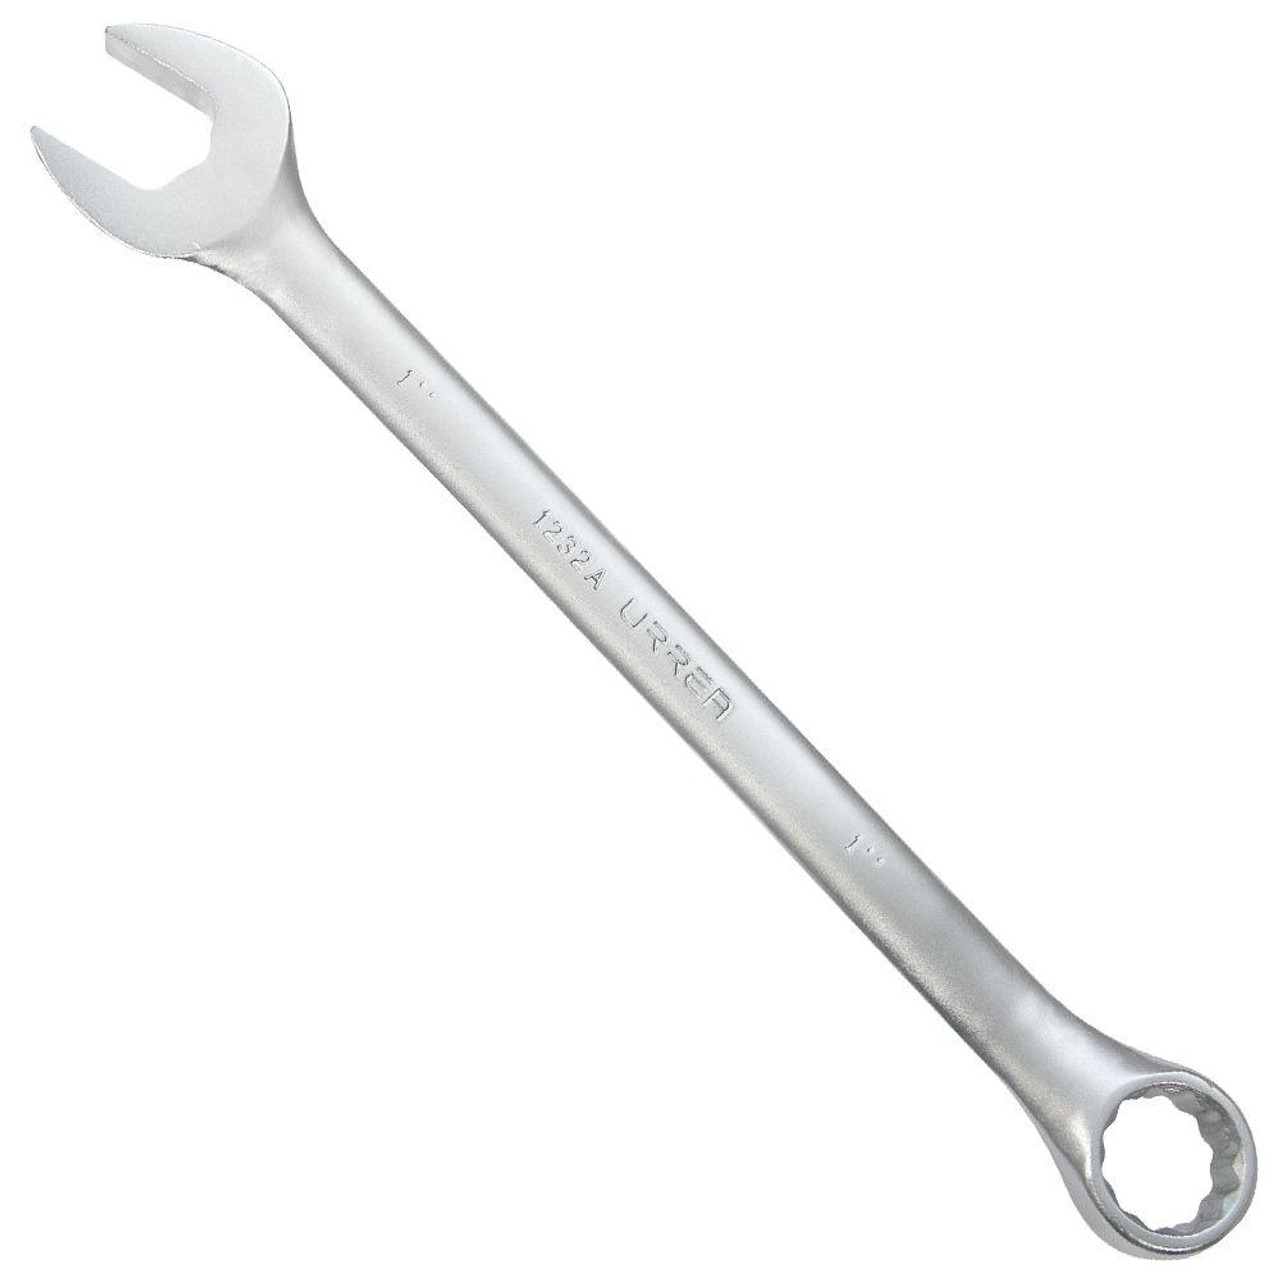 Satin finish combination wrench, Size: 1-5/8, 12 point, Tool Length: 23-1/8"